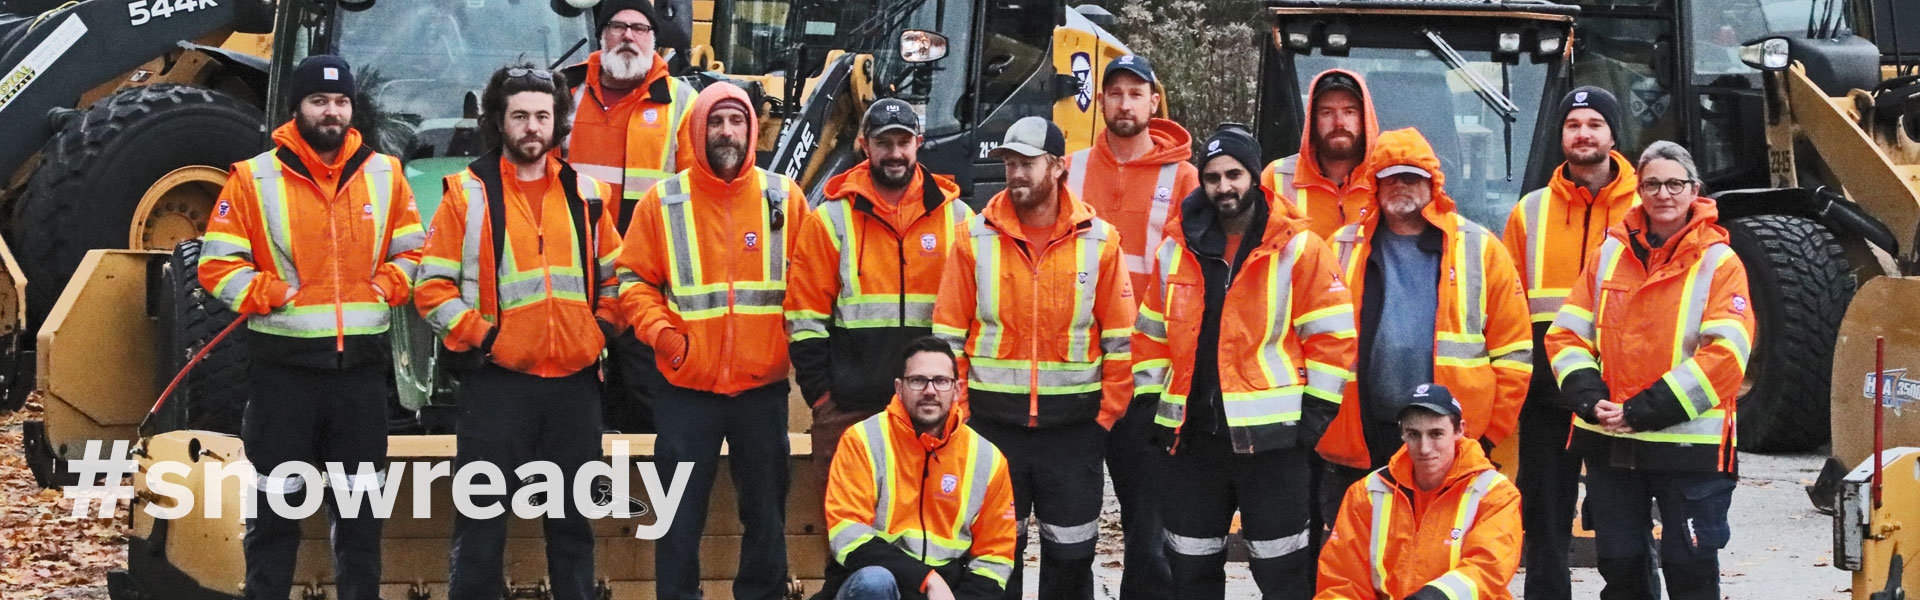 Our snow equipment is tuned up and our operators are prepared for the winter ahead. The image is a group shot of the team, dressed in high visibility vest and posing in front of the snow removal vehicles.